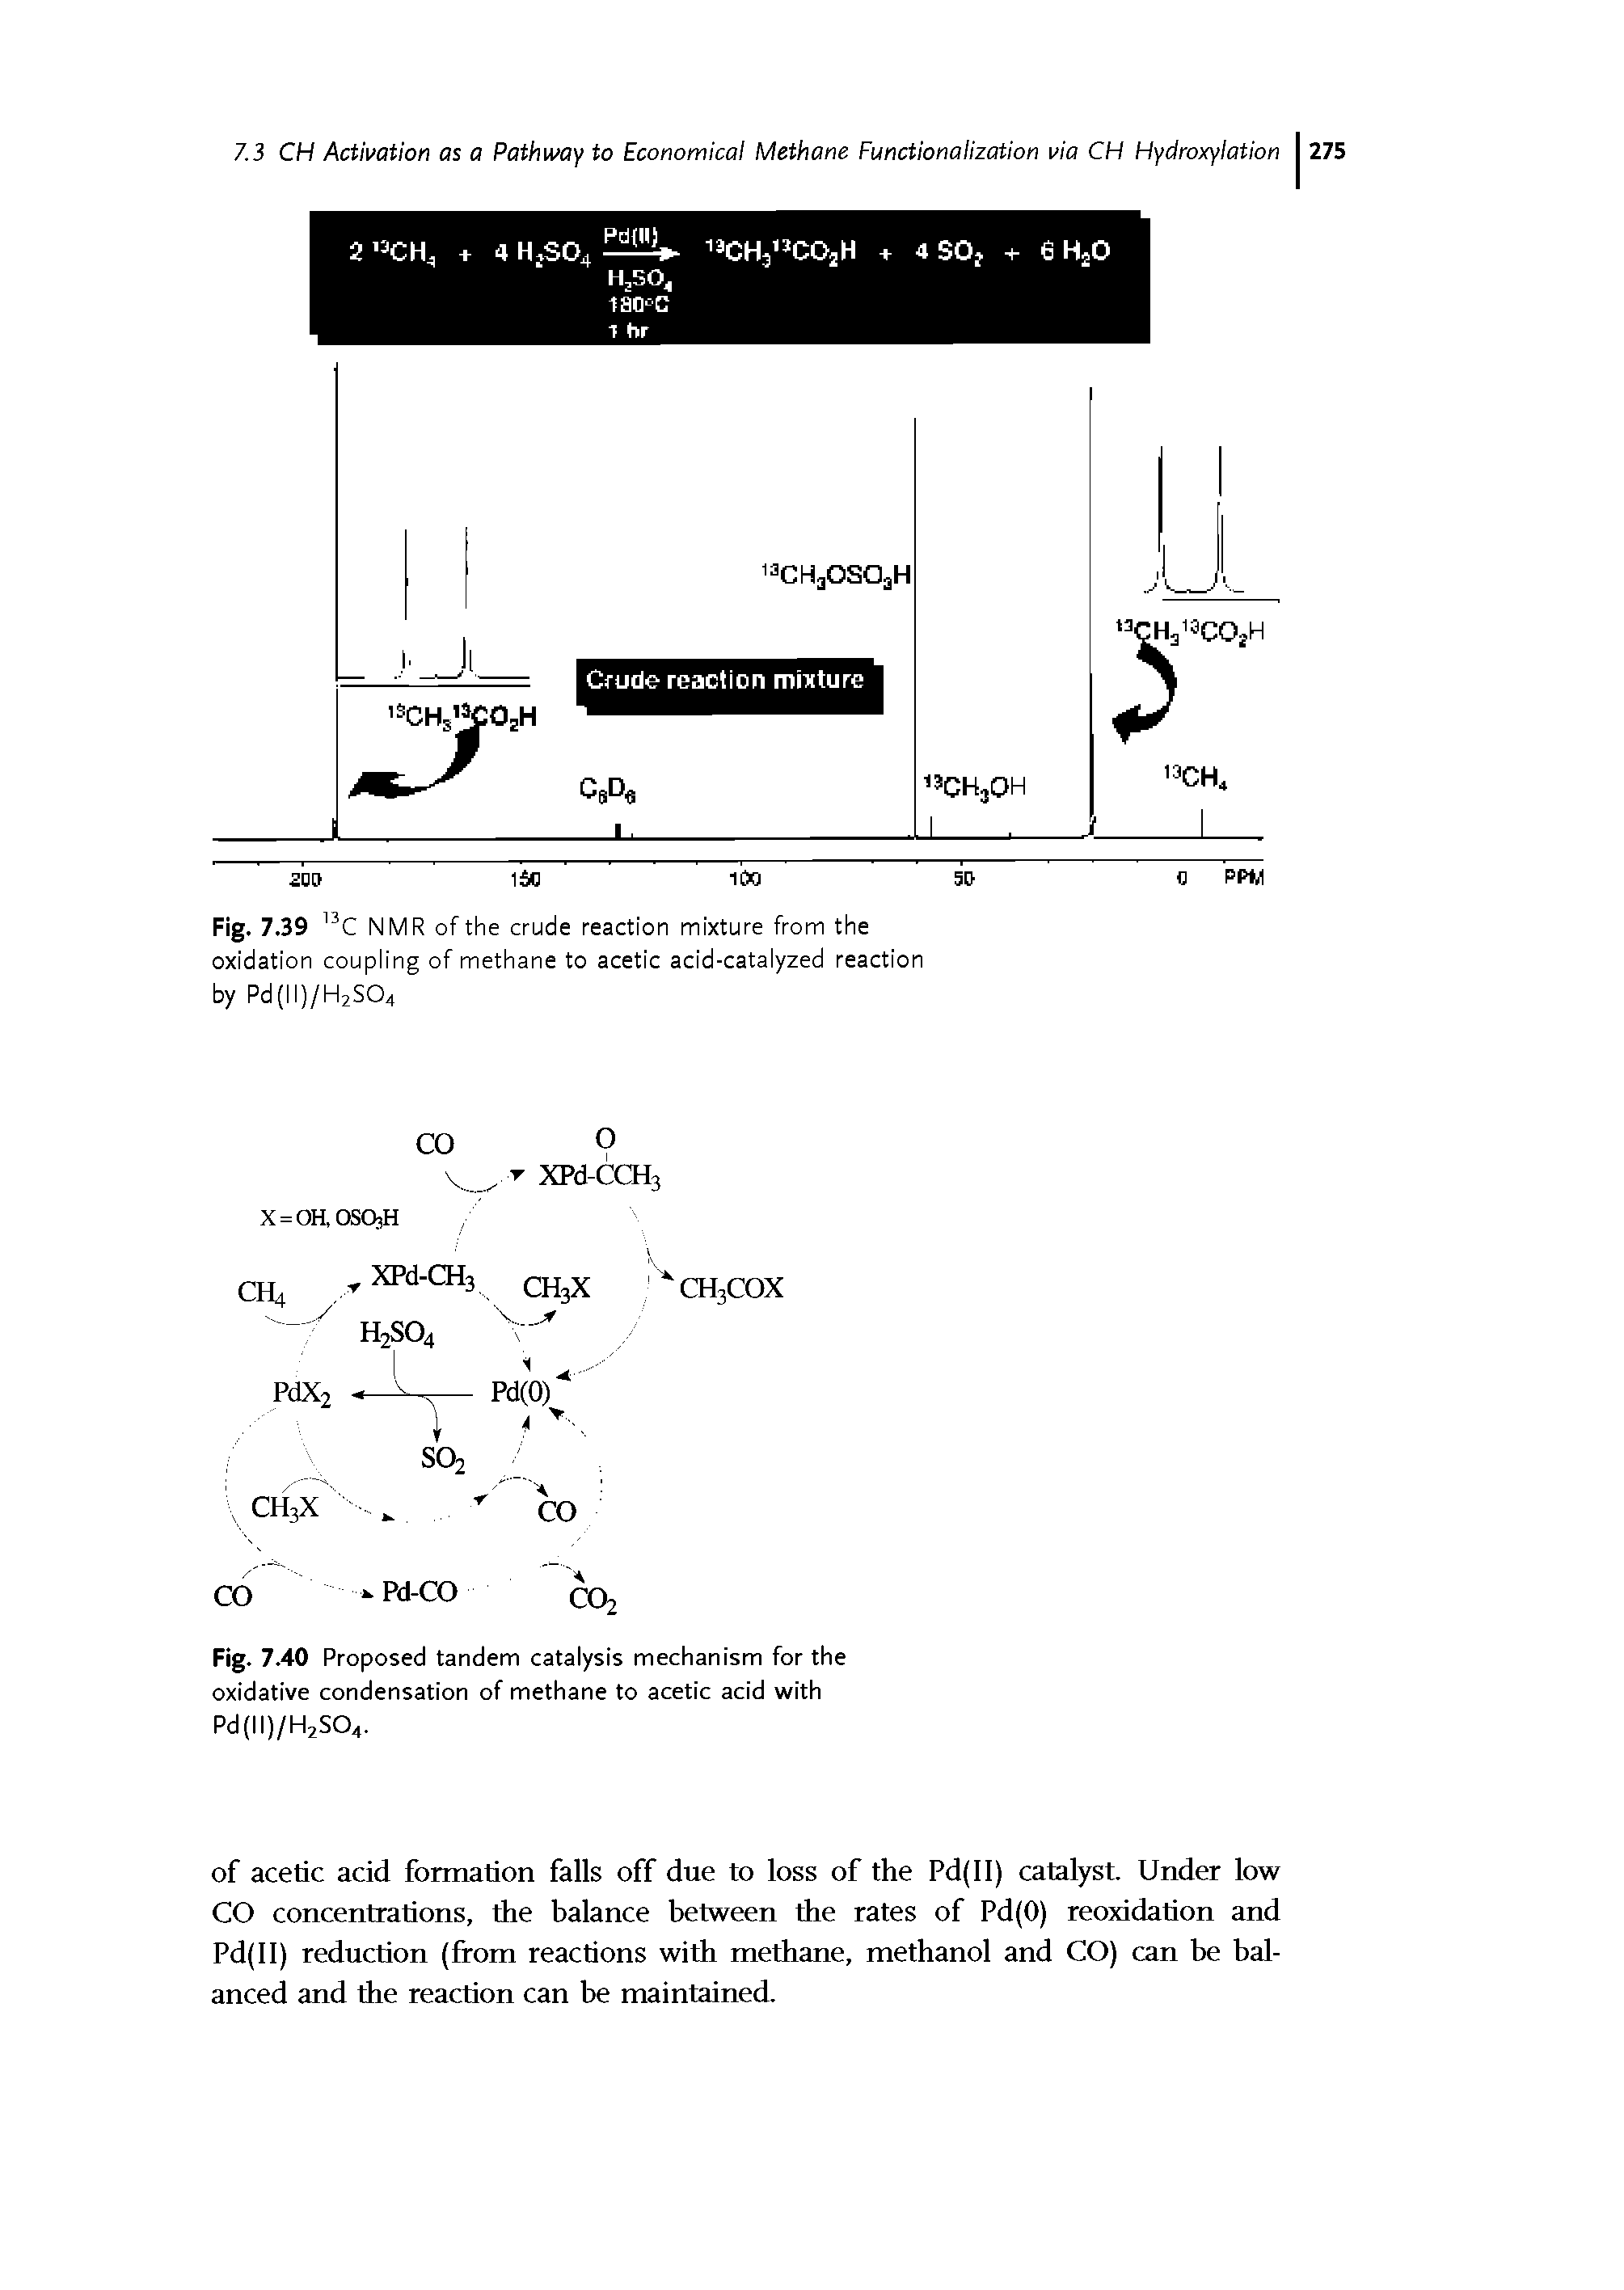 Fig. 7.39 C NMR of the crude reaction mixture from the oxidation coupiing of methane to acetic acid-cataiyzed reaction...